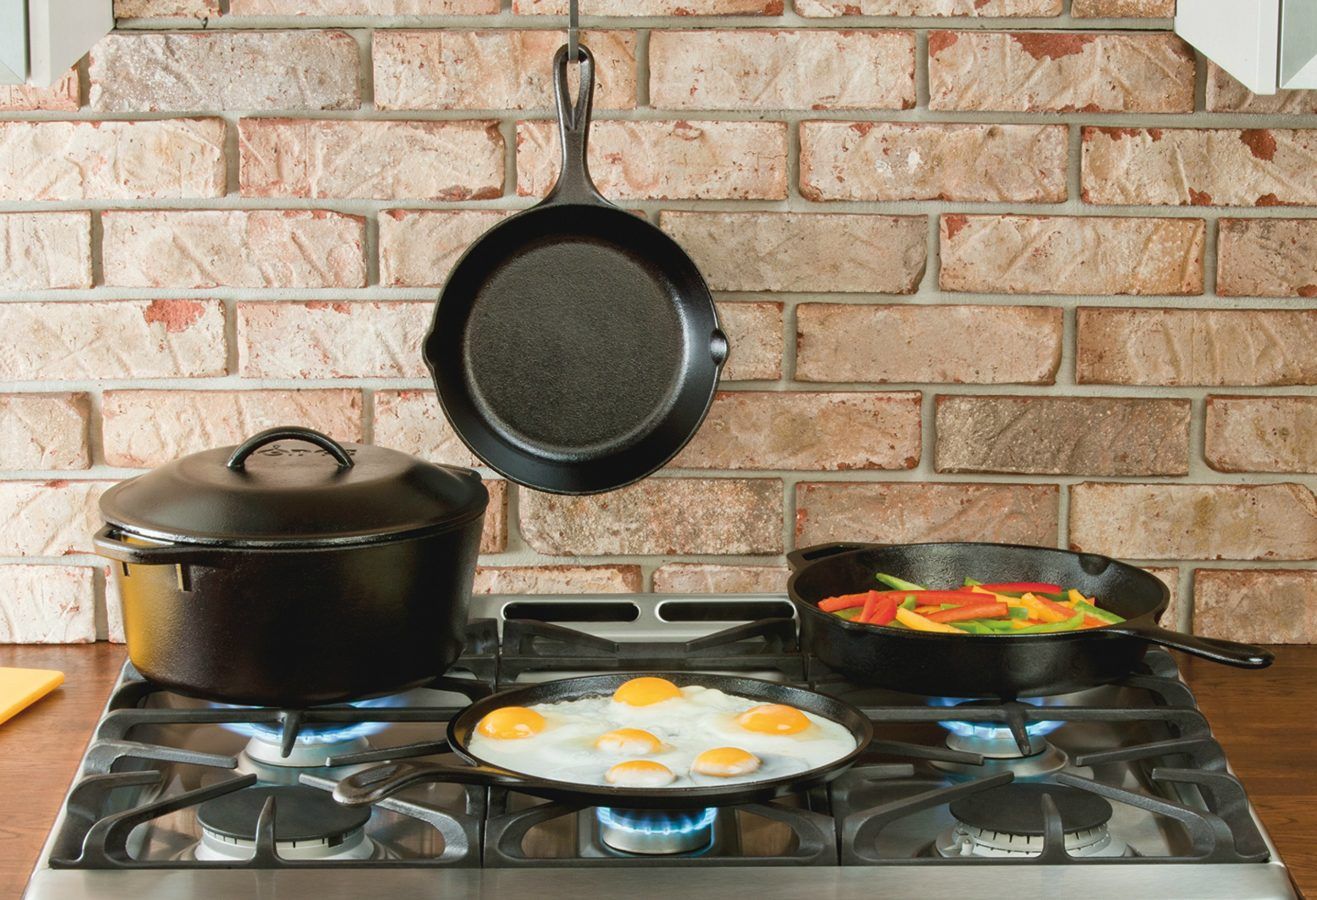 Lodge Cast Iron Grill Pan - Best Price in Singapore - Nov 2023